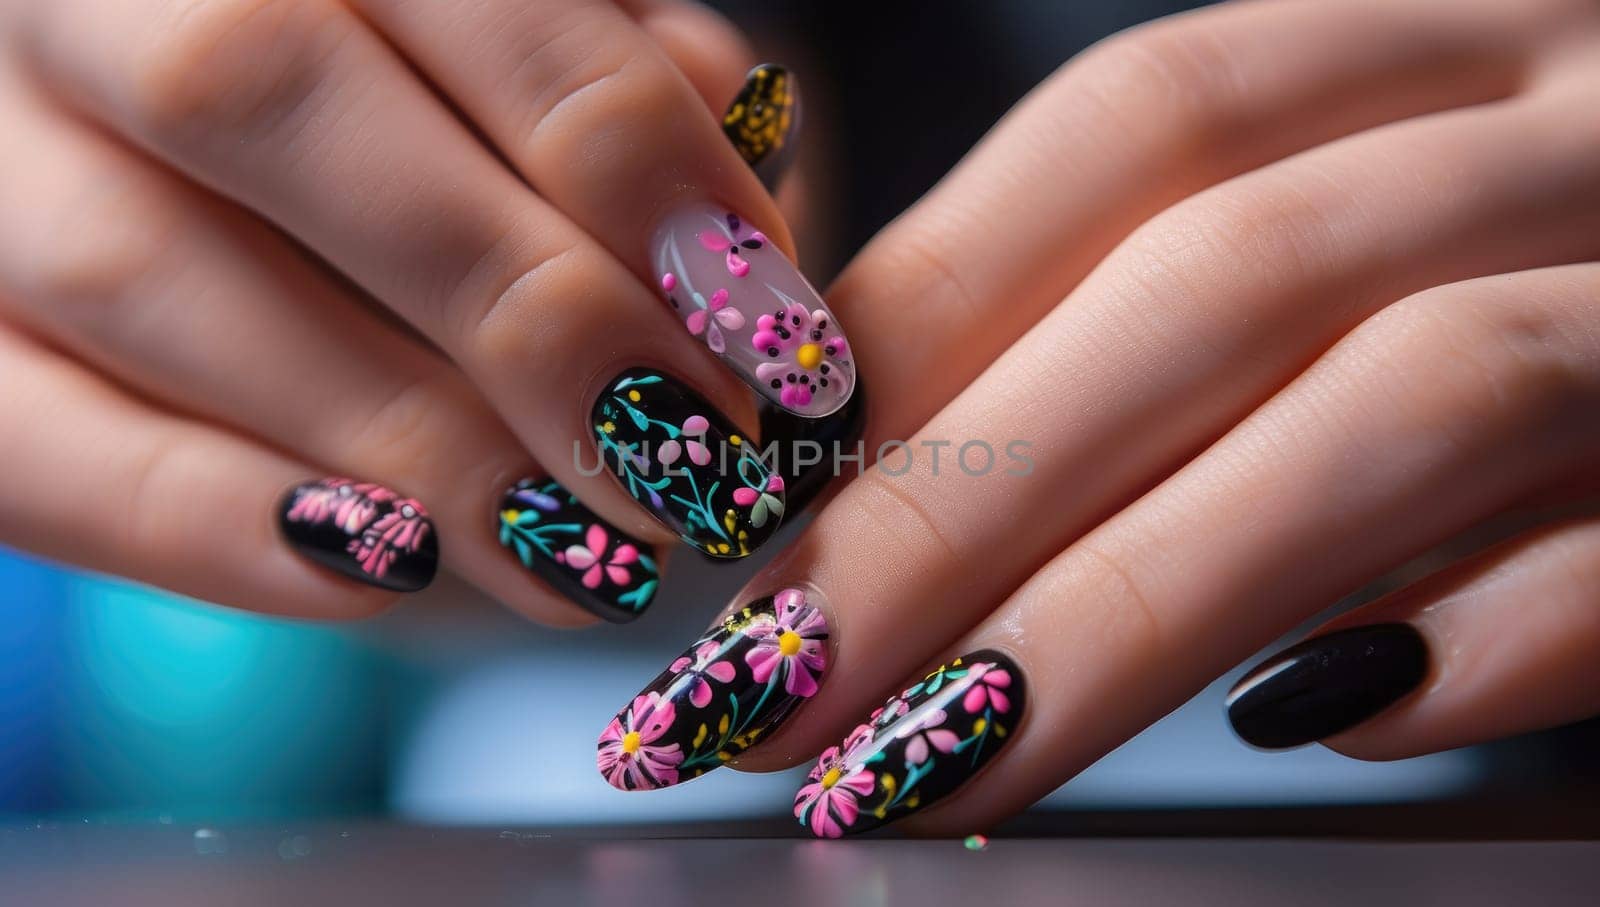 Intricate Floral Nail Art on Female Hands